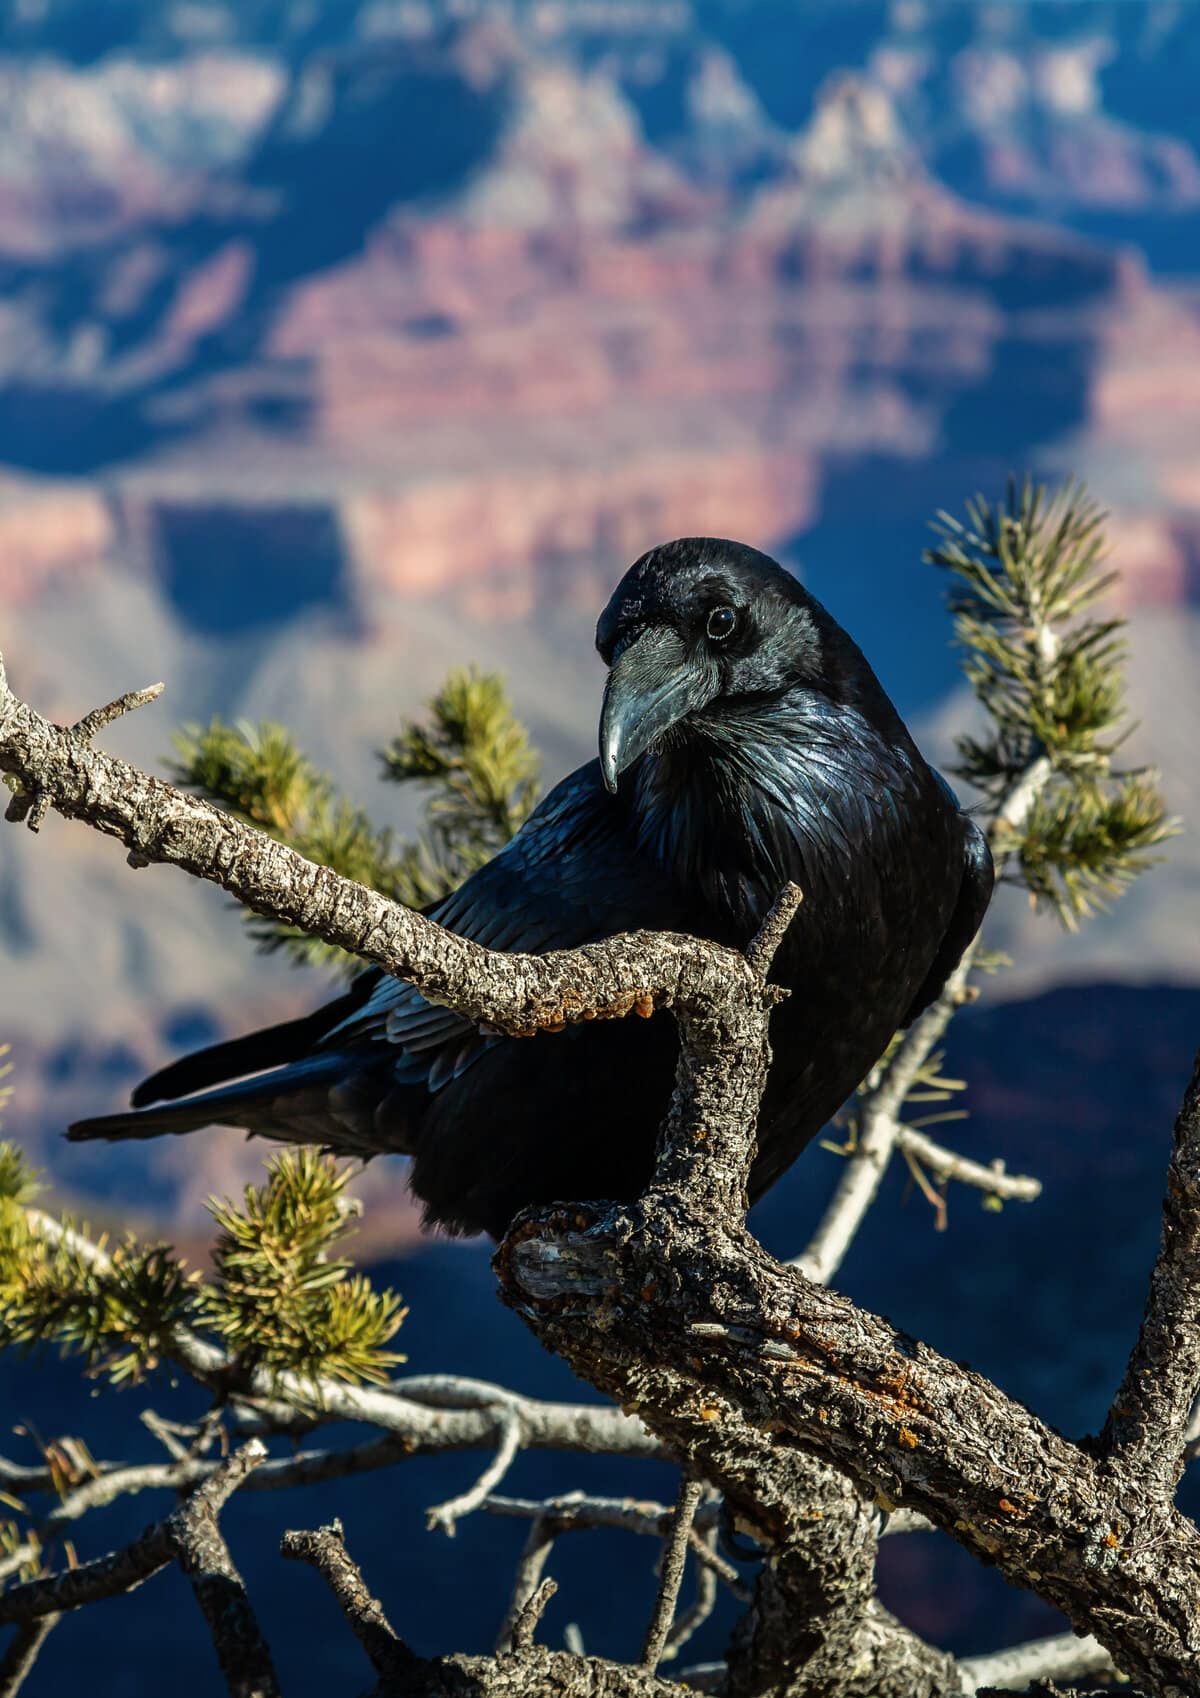 A raven at the Grand Canyon